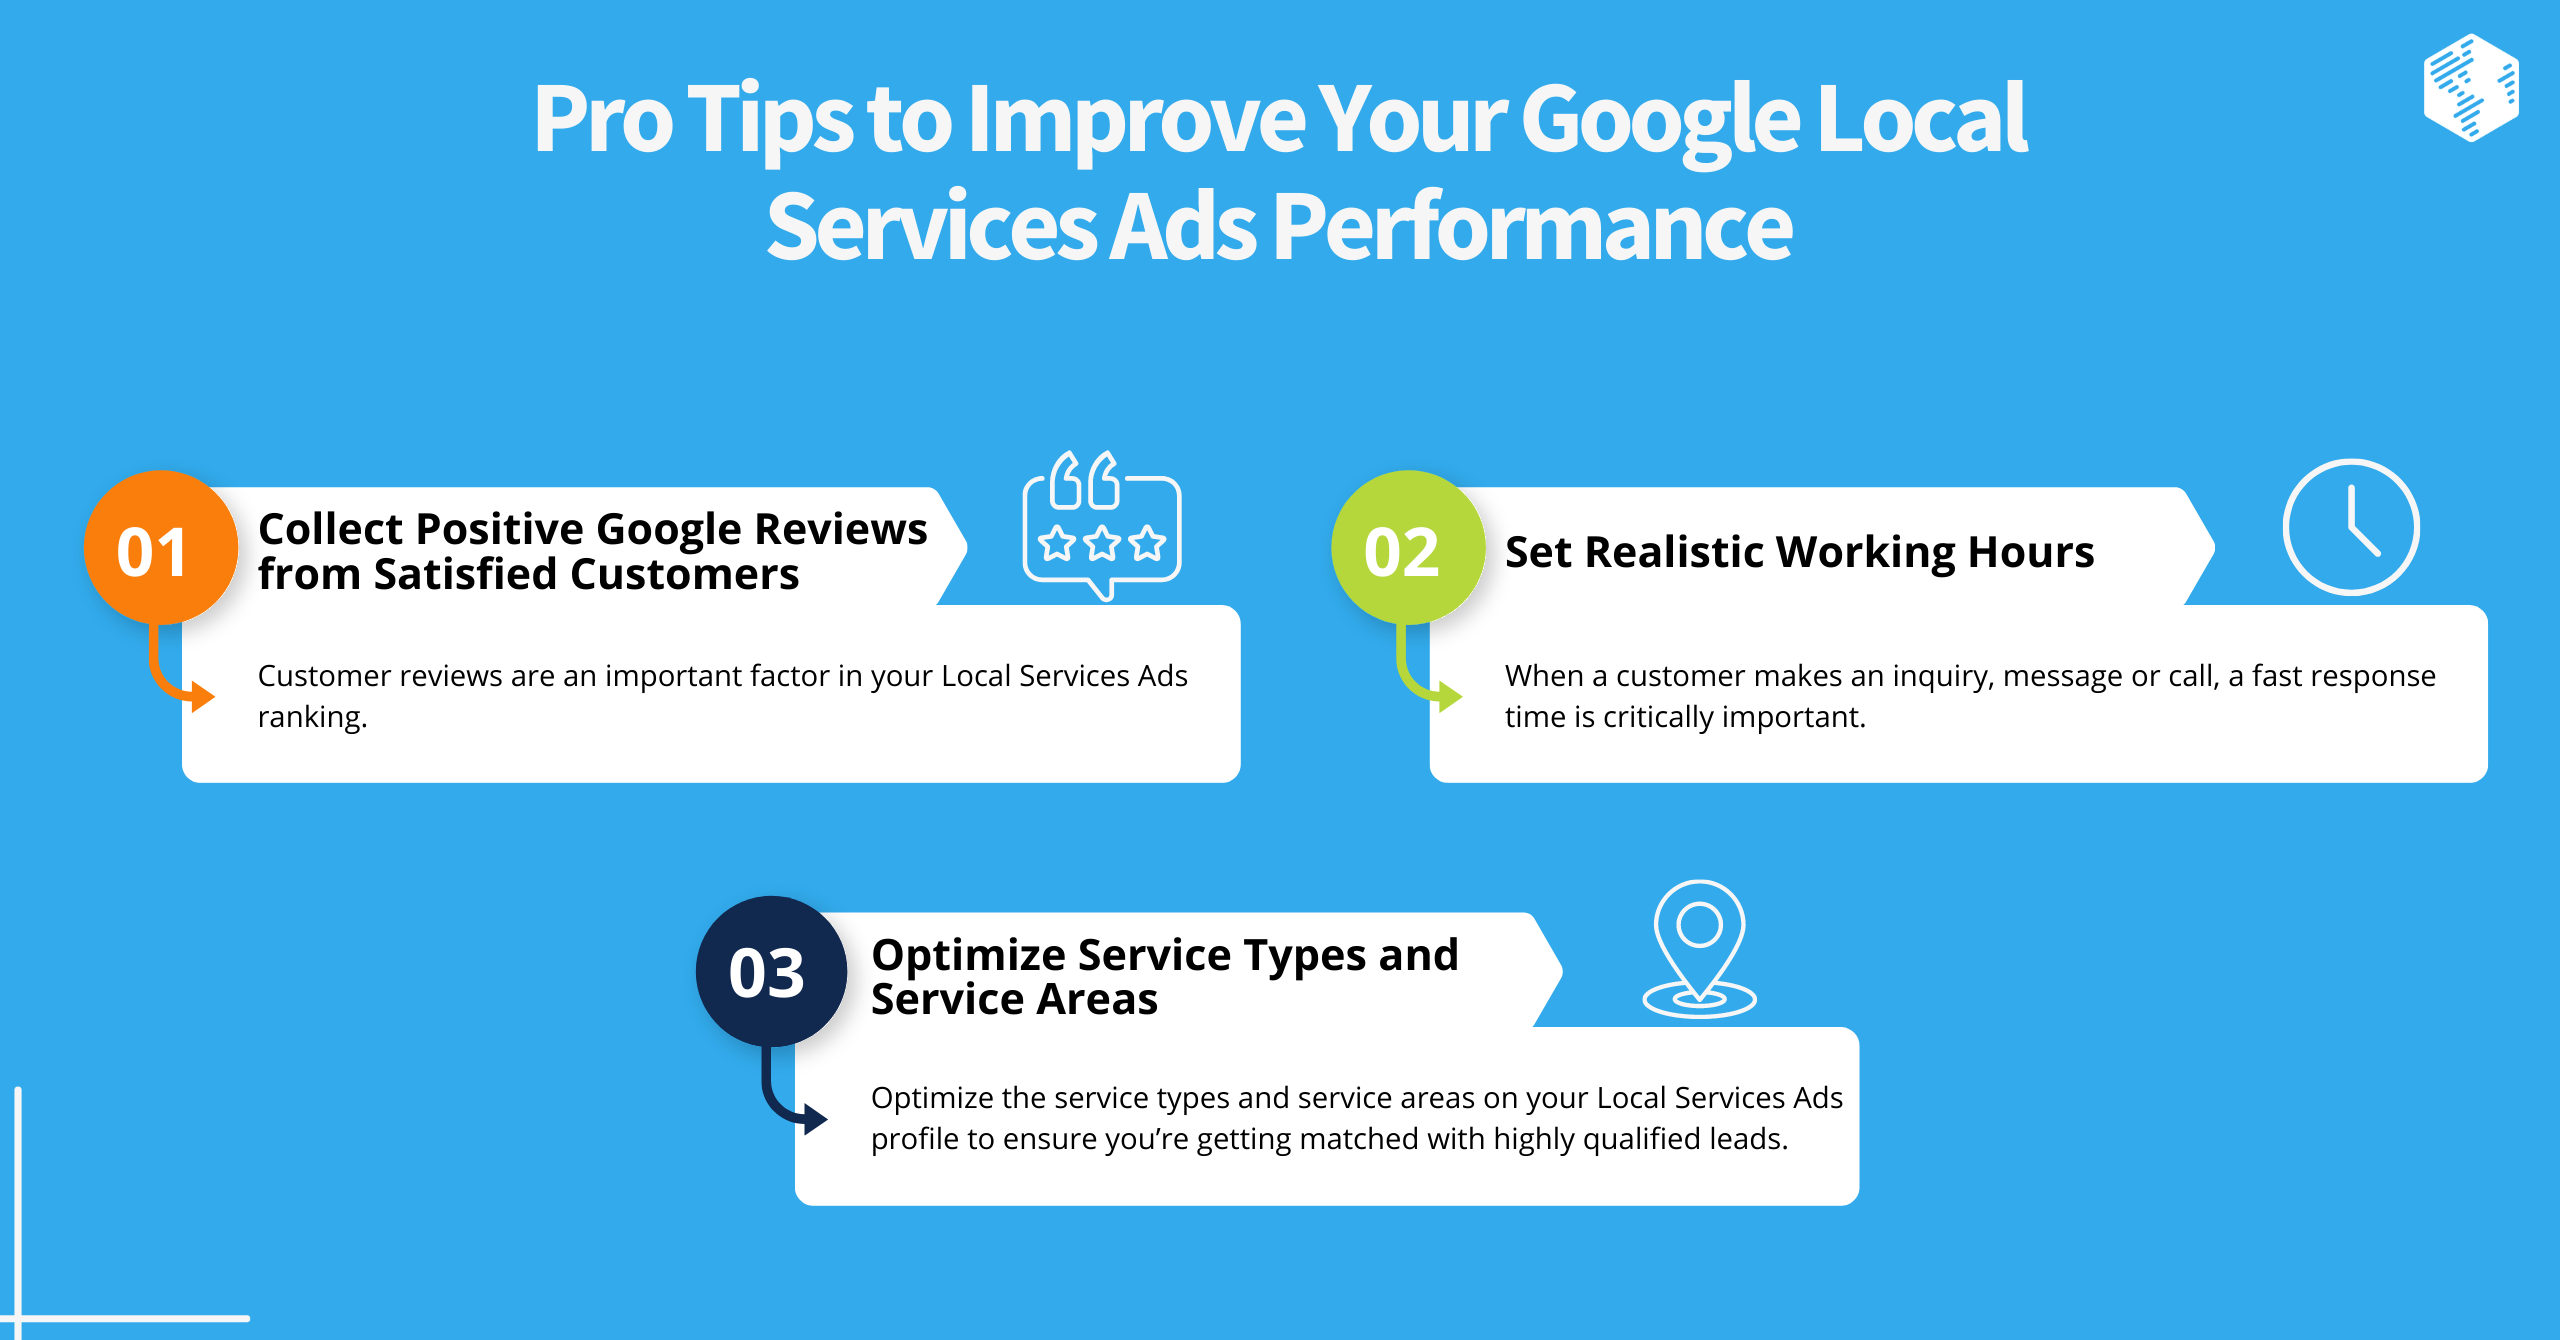 Pro Tips to Improve Your Google Local Services Ads Performance